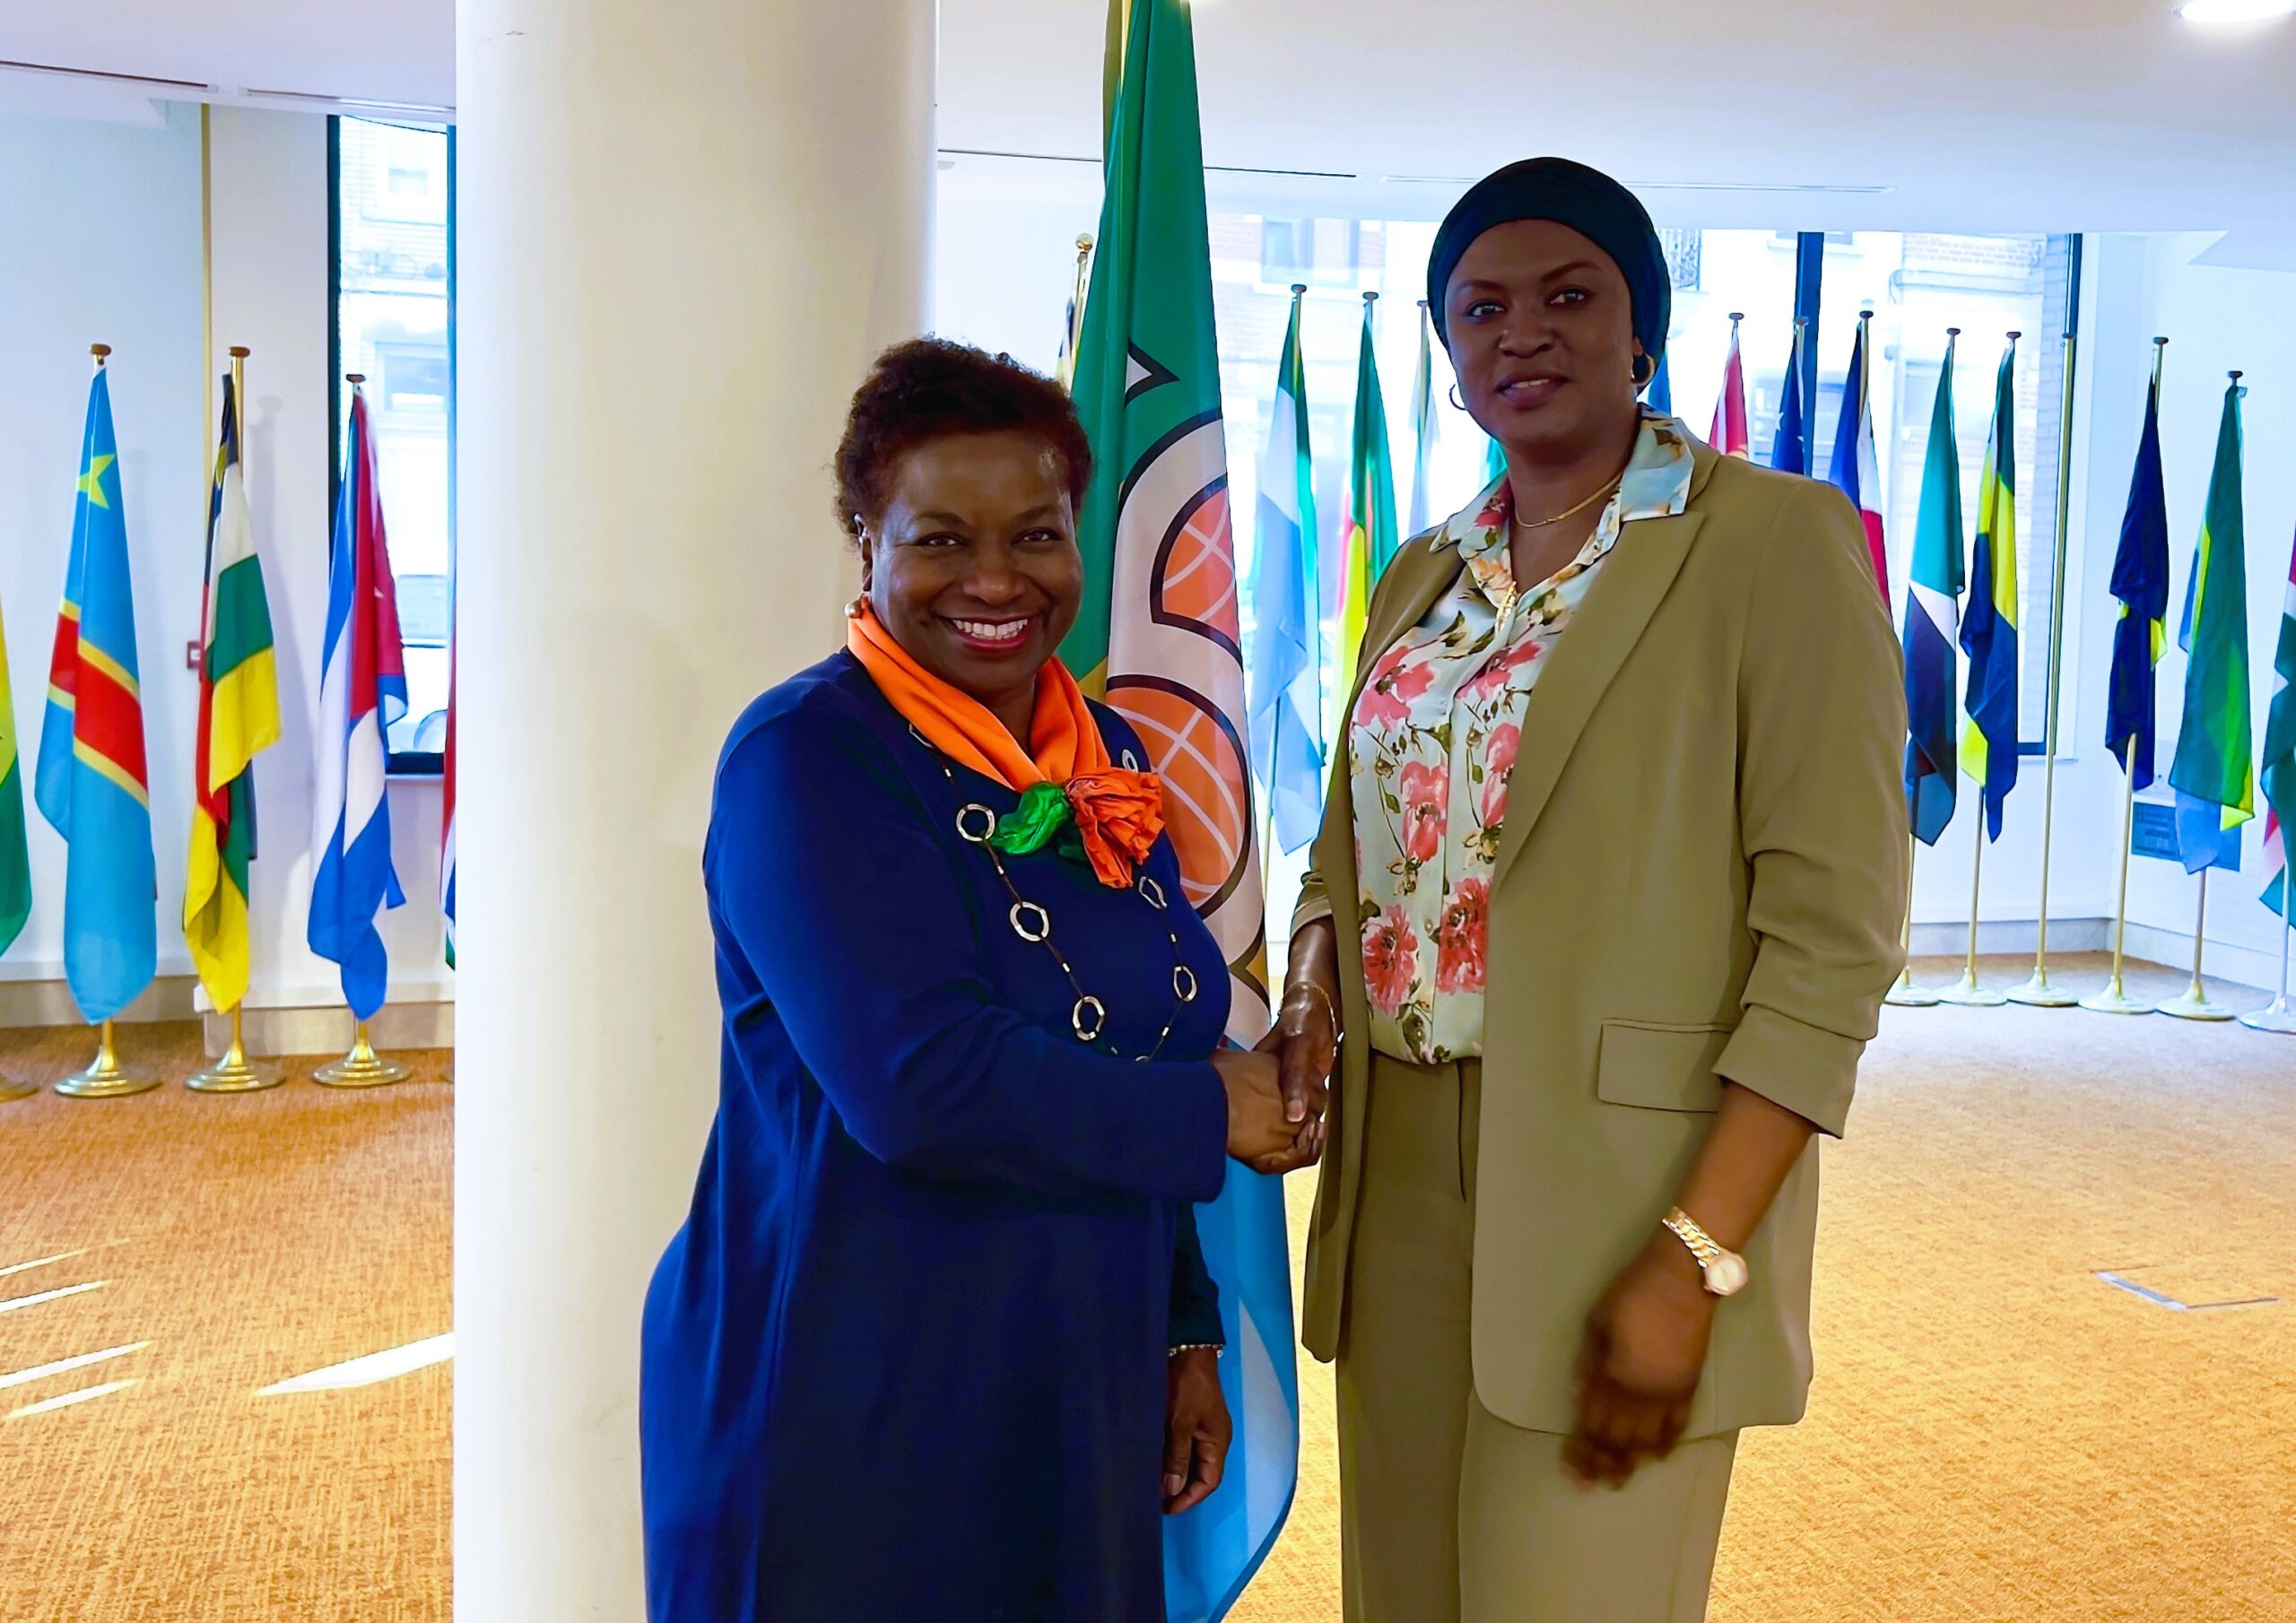 Meeting with Dr. Natalia Kanem, UNFPA Executive Director  Wednesday 19 April 2023, OACPS Headquarters, Brussels.